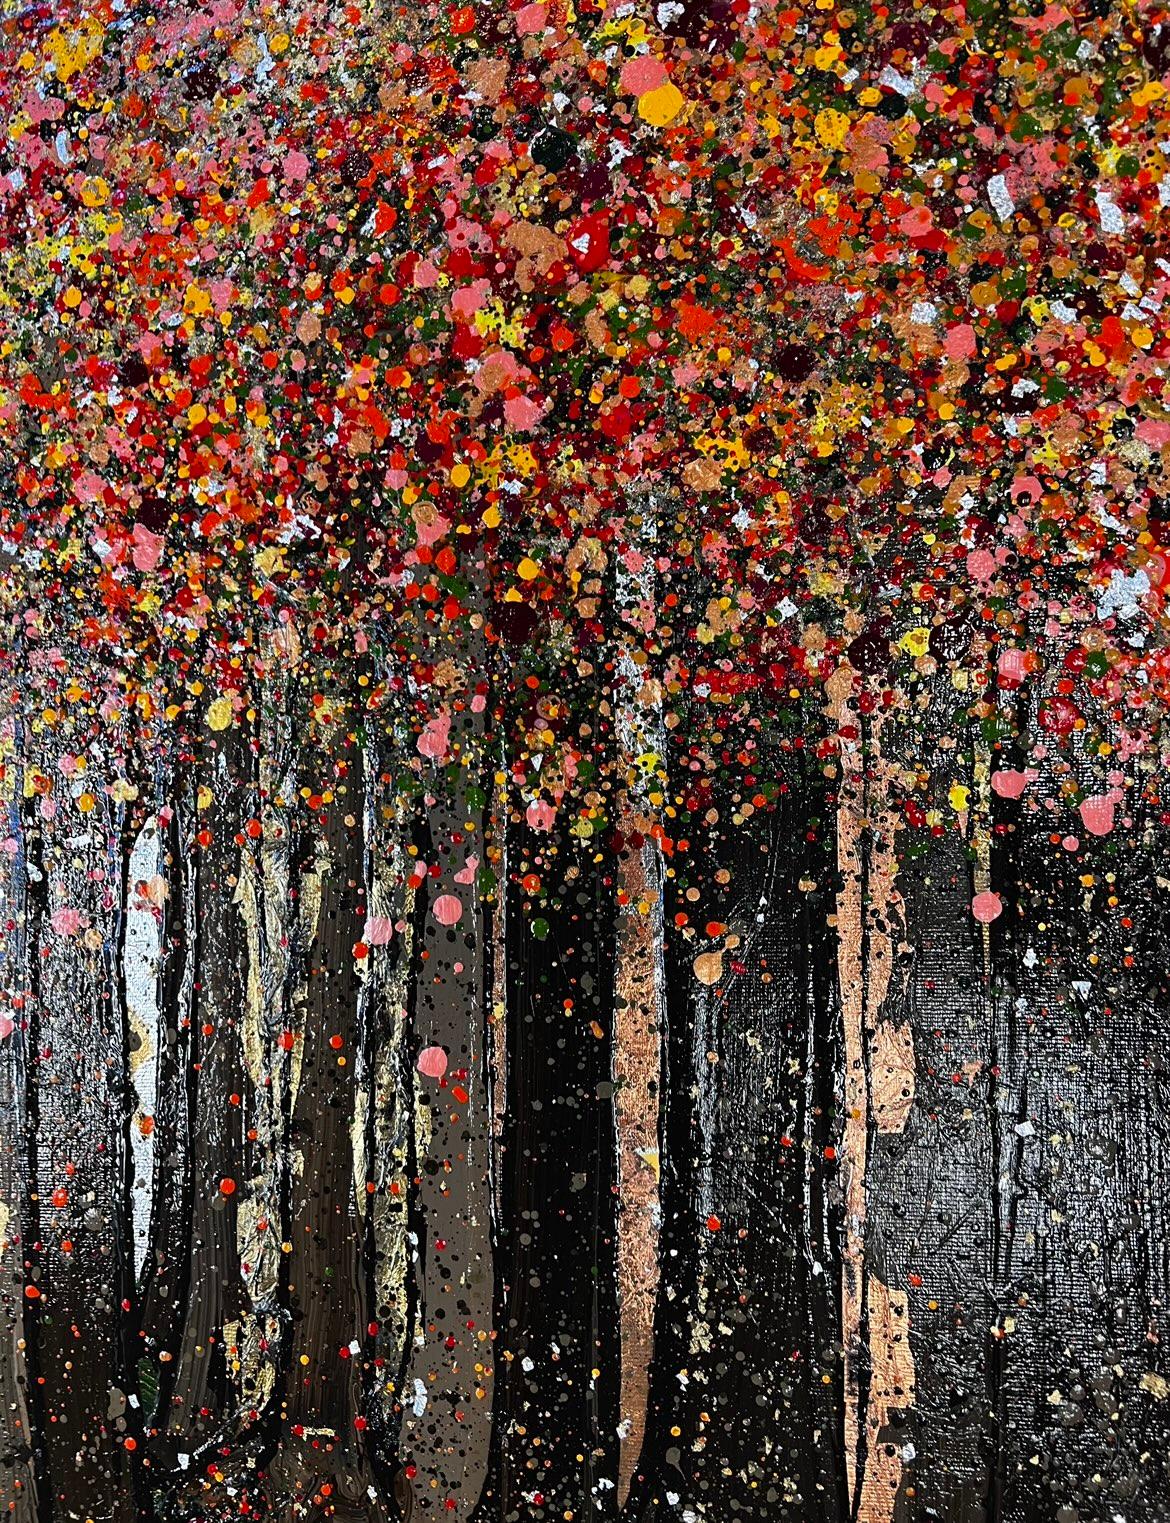 Tumbling Autumn Leaves [2021]

original
Acrylic Paint on Canvas
Image size: H:120 cm x W:60 cm
Complete Size of Unframed Work: H:120 cm x W:60 cm x D:5cm
Sold Unframed
Please note that insitu images are purely an indication of how a piece may